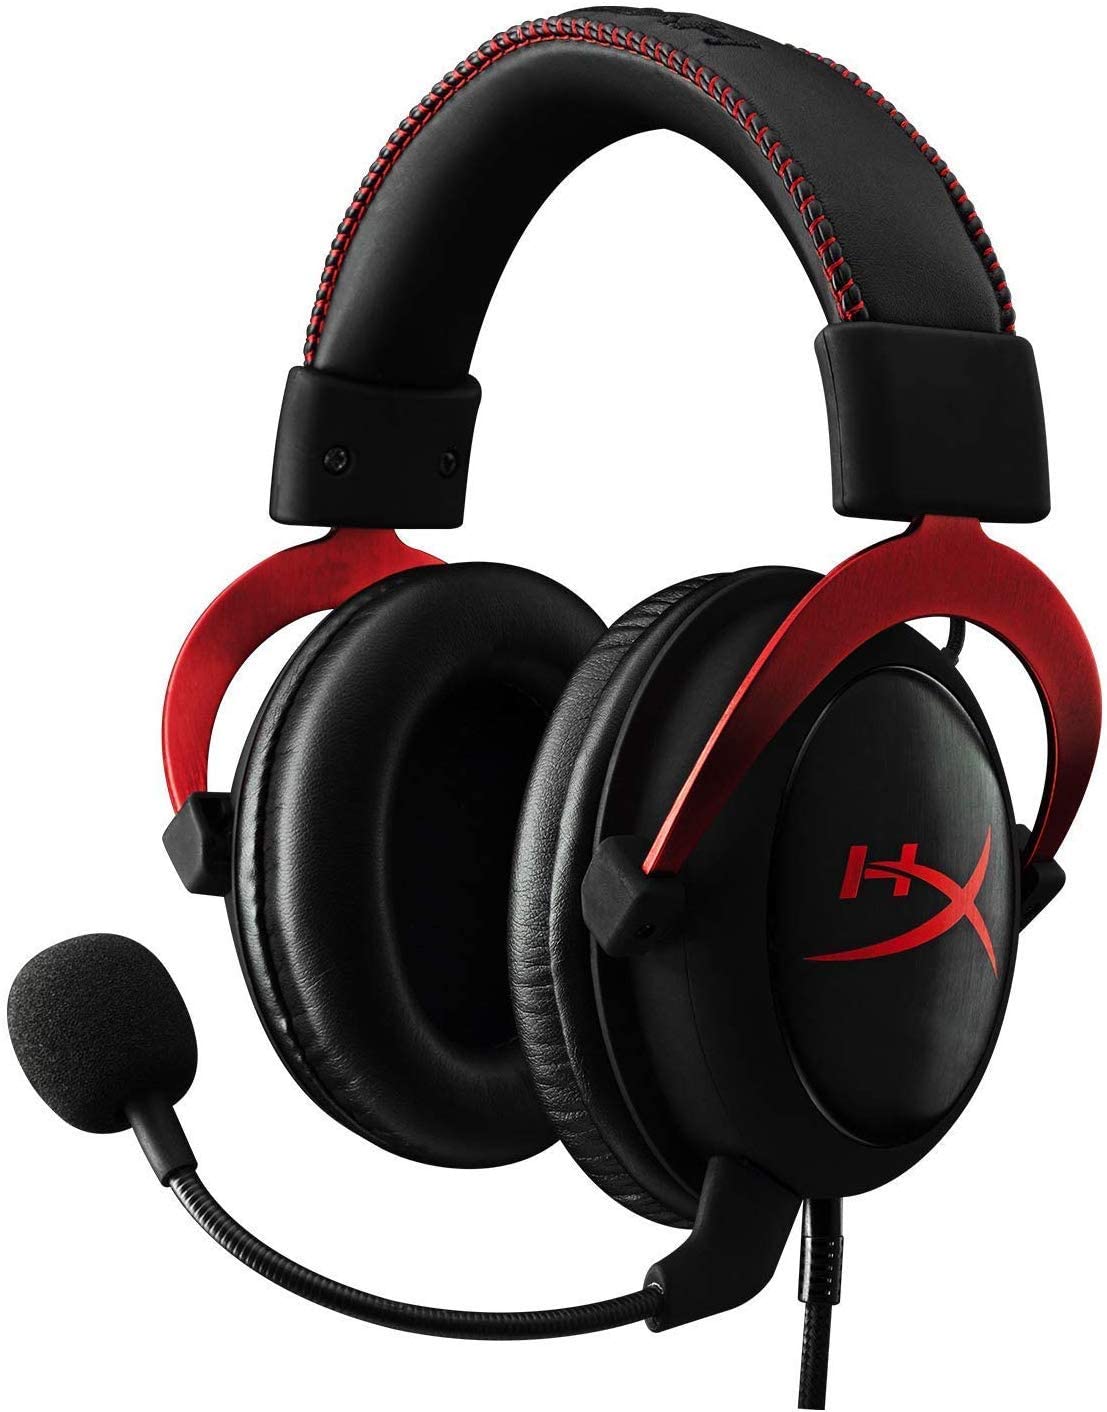 HyperX Cloud II Gaming Headset for PC & PS4 & Xbox One, Nintendo Switch - Red (KHX-HSCP-RD), 17 x 12 x 7 cm